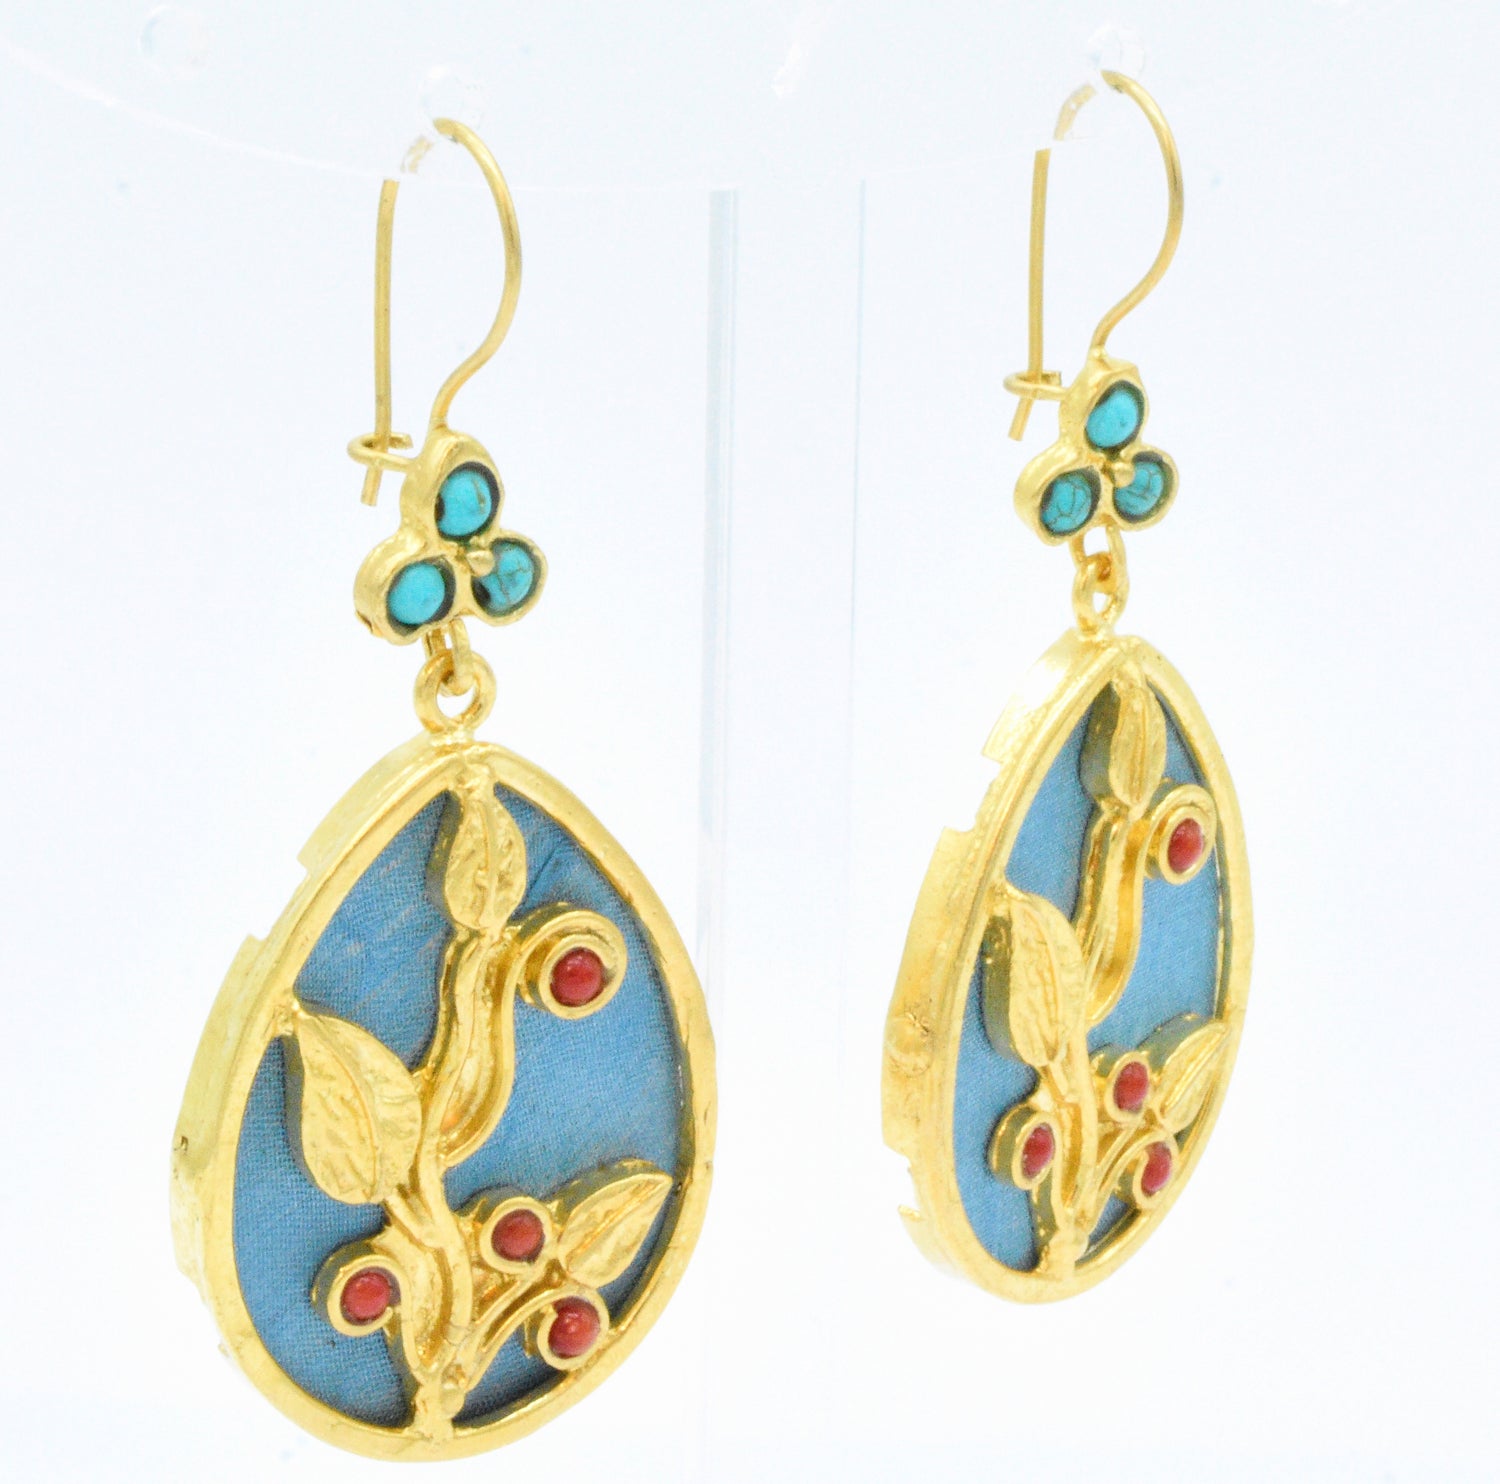 Aylas Red coral & Turquoise earrings - Gold plated semi-precious gemstone - Handmade in Ottoman style